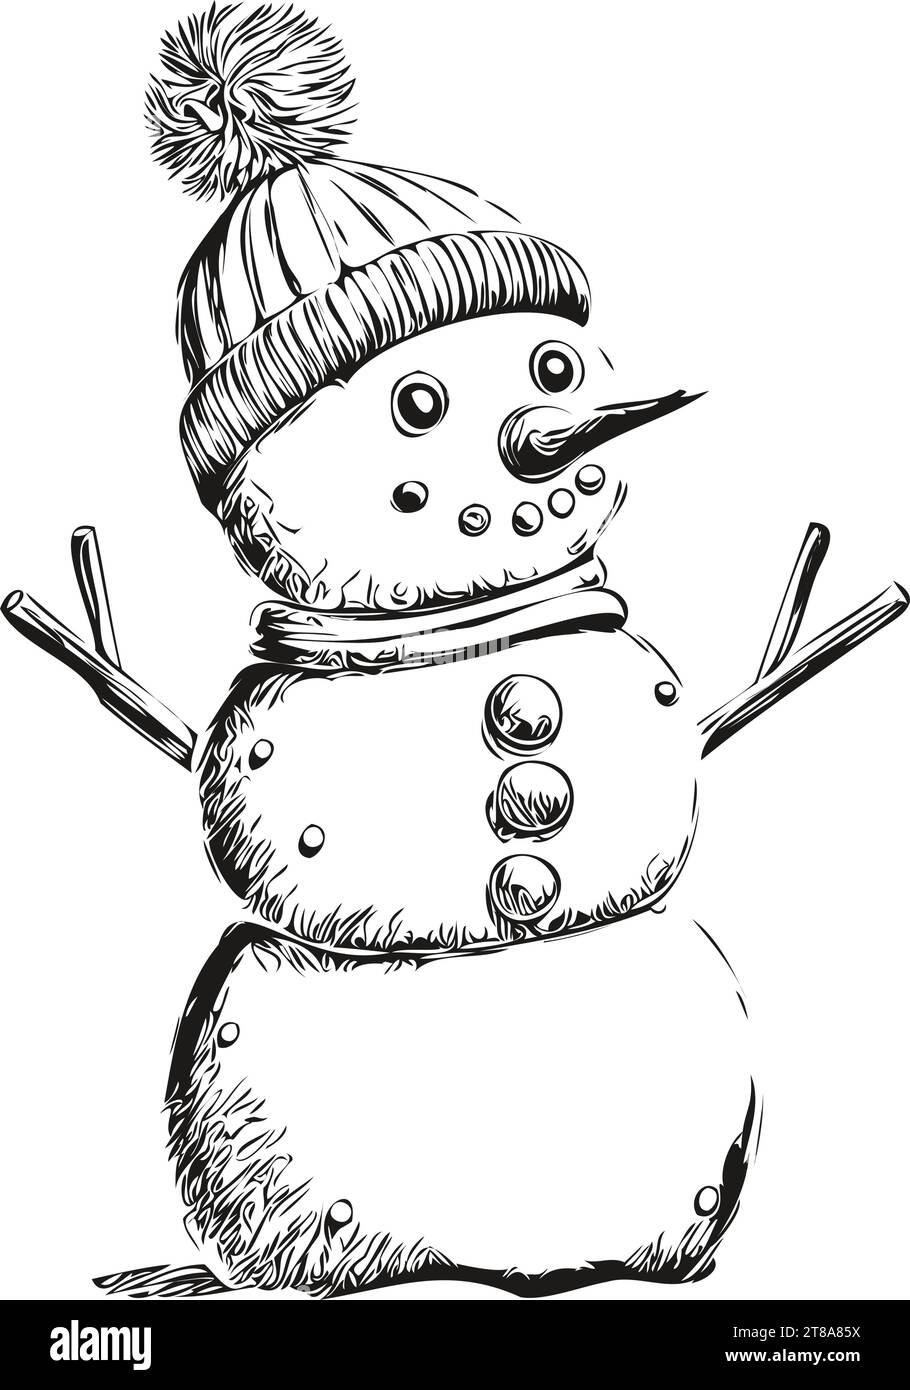 Snowman Vintage Engraved Sketch Detailed Illustration of Christmas Snowman, Classic Black and White, and Festive Elements, black white isolated Vector Stock Vector